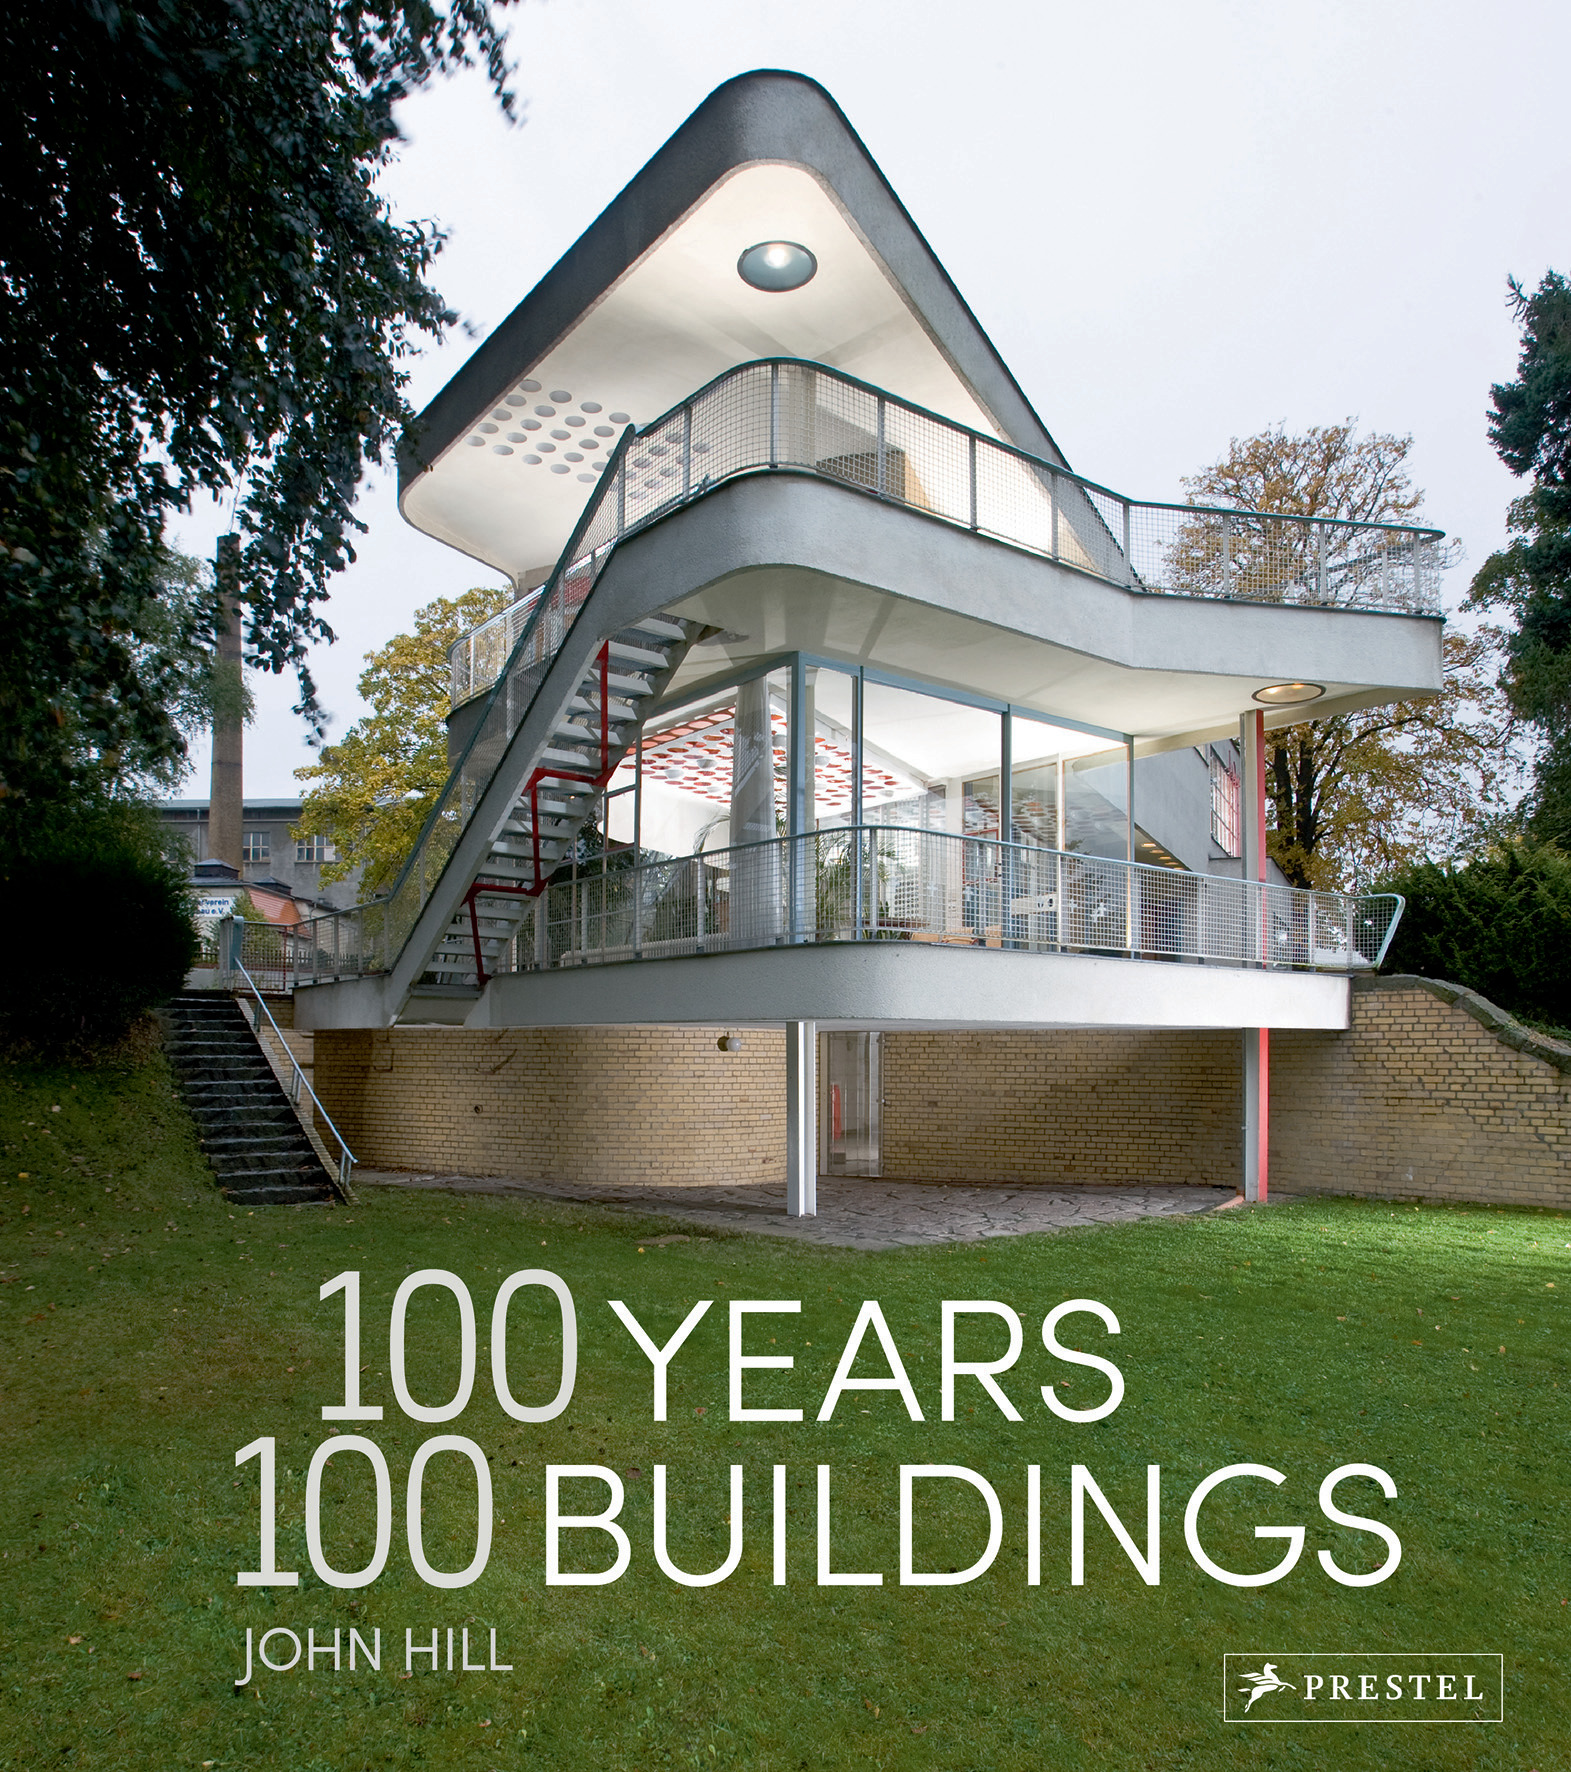 100 Years 100 Buildings by John Hill